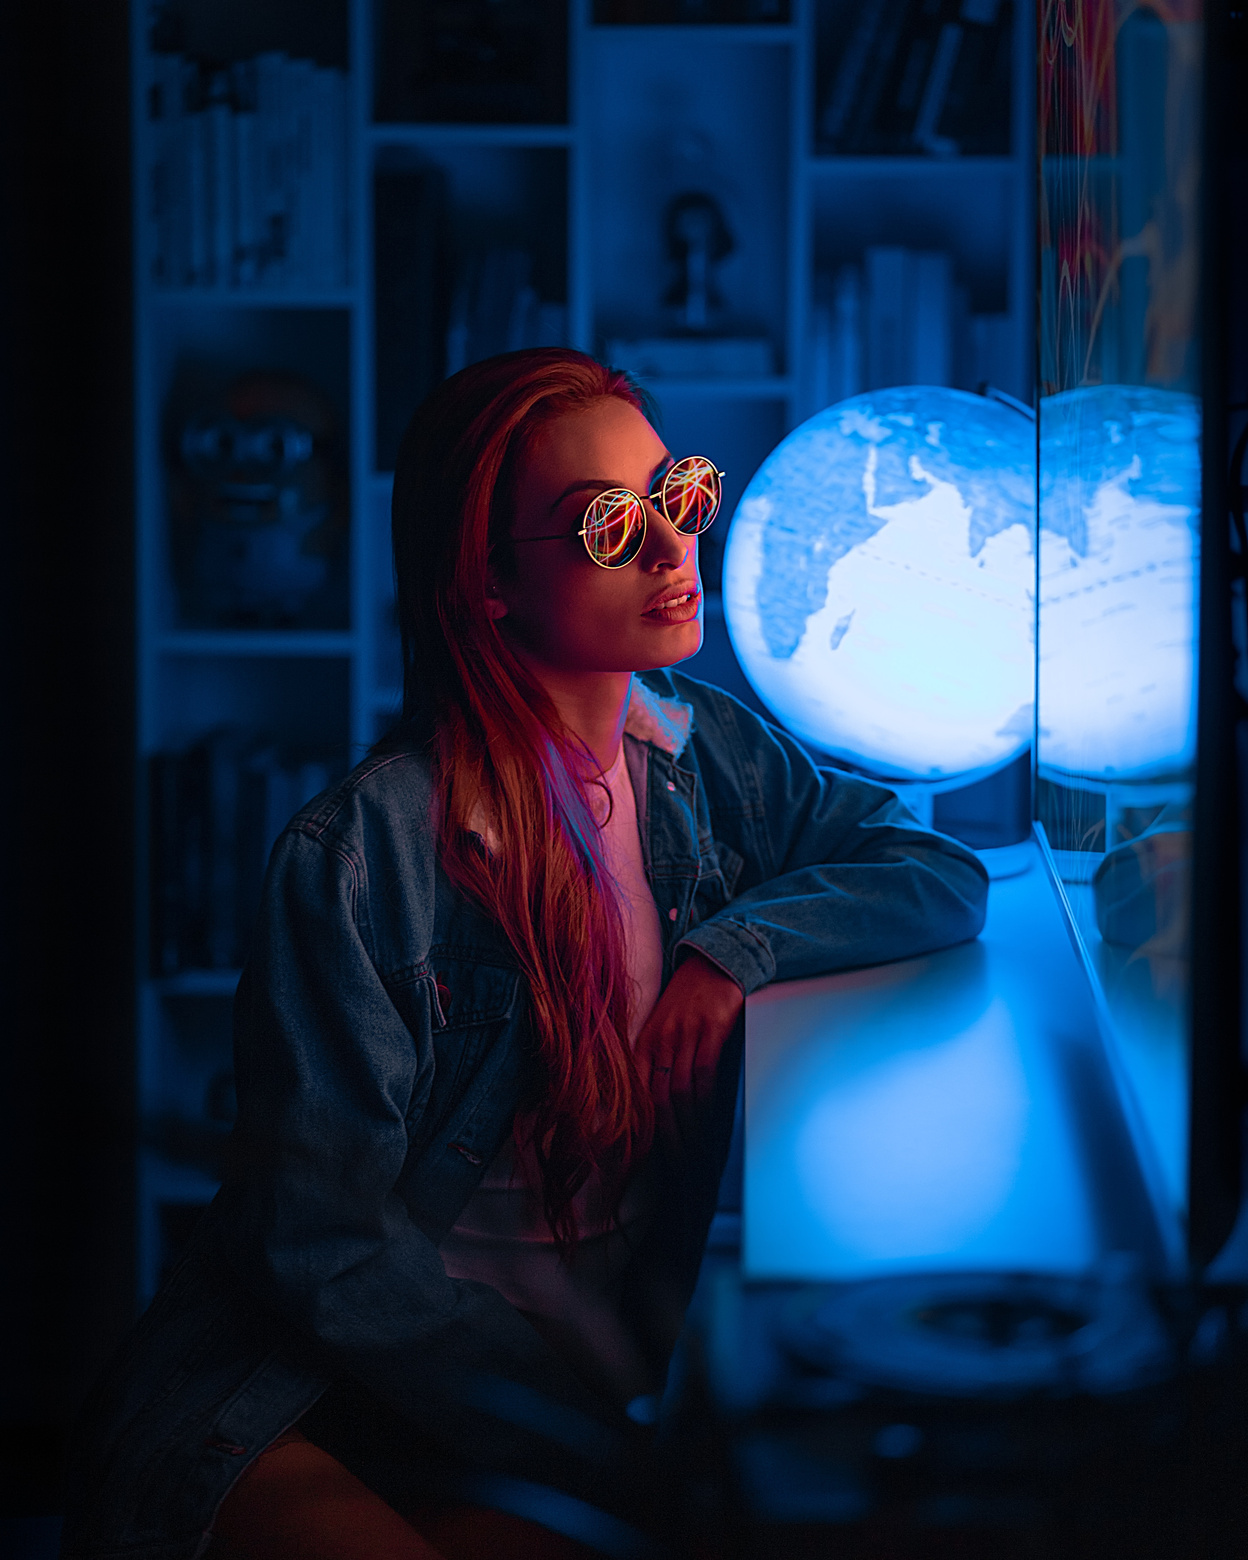 a person with red hair sitting in front of a globe